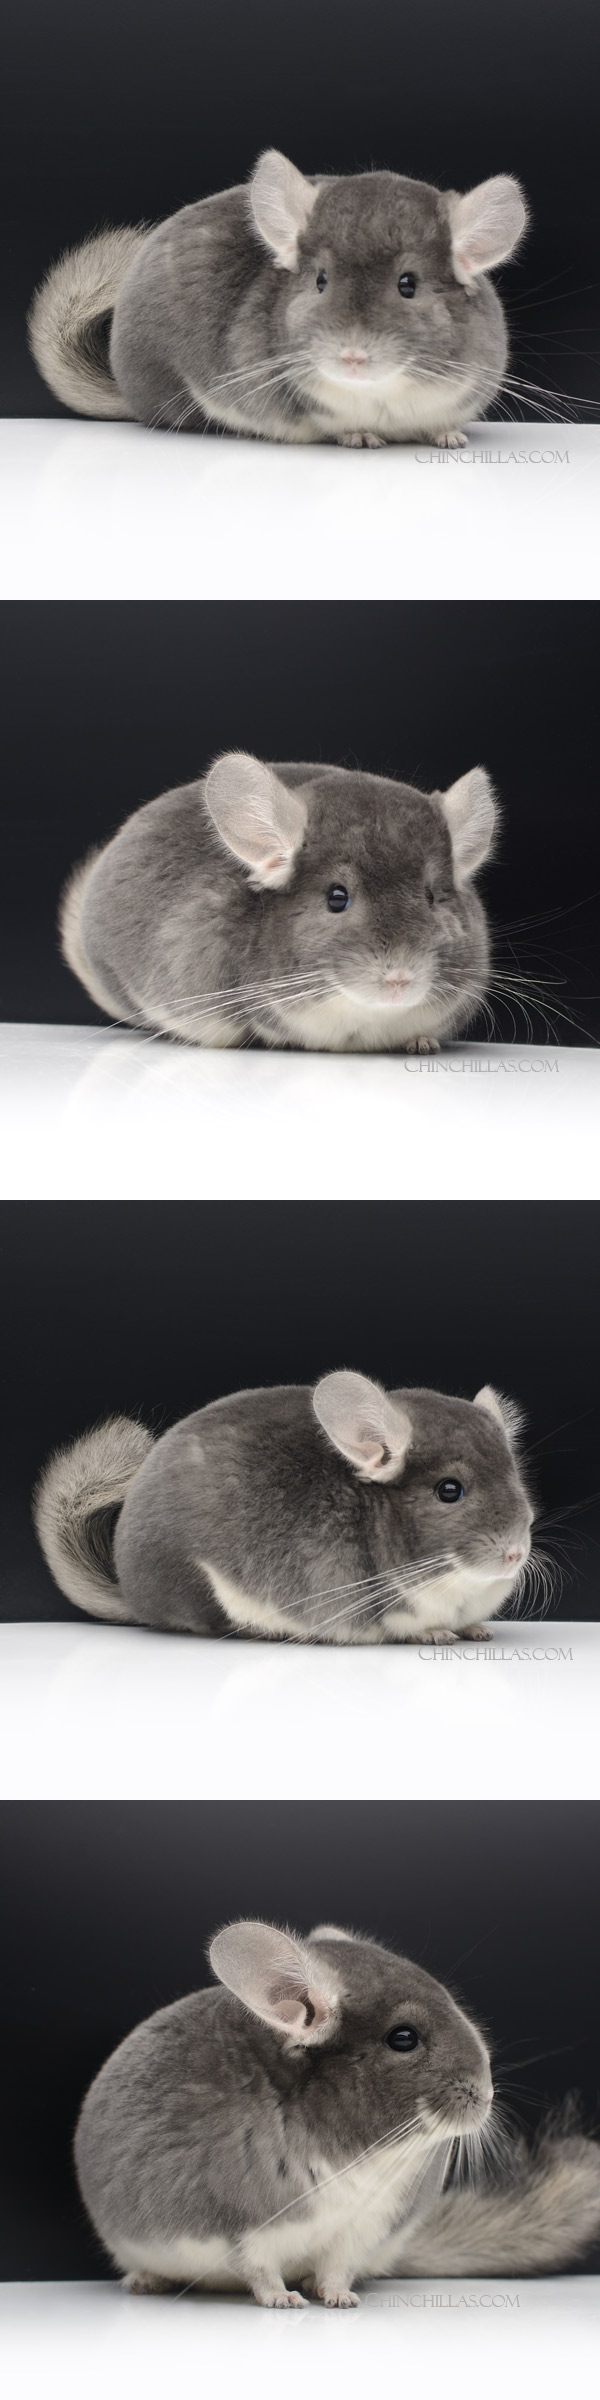 Chinchilla or related item offered for sale or export on Chinchillas.com - 24052 Show Quality Violet Male Chinchilla